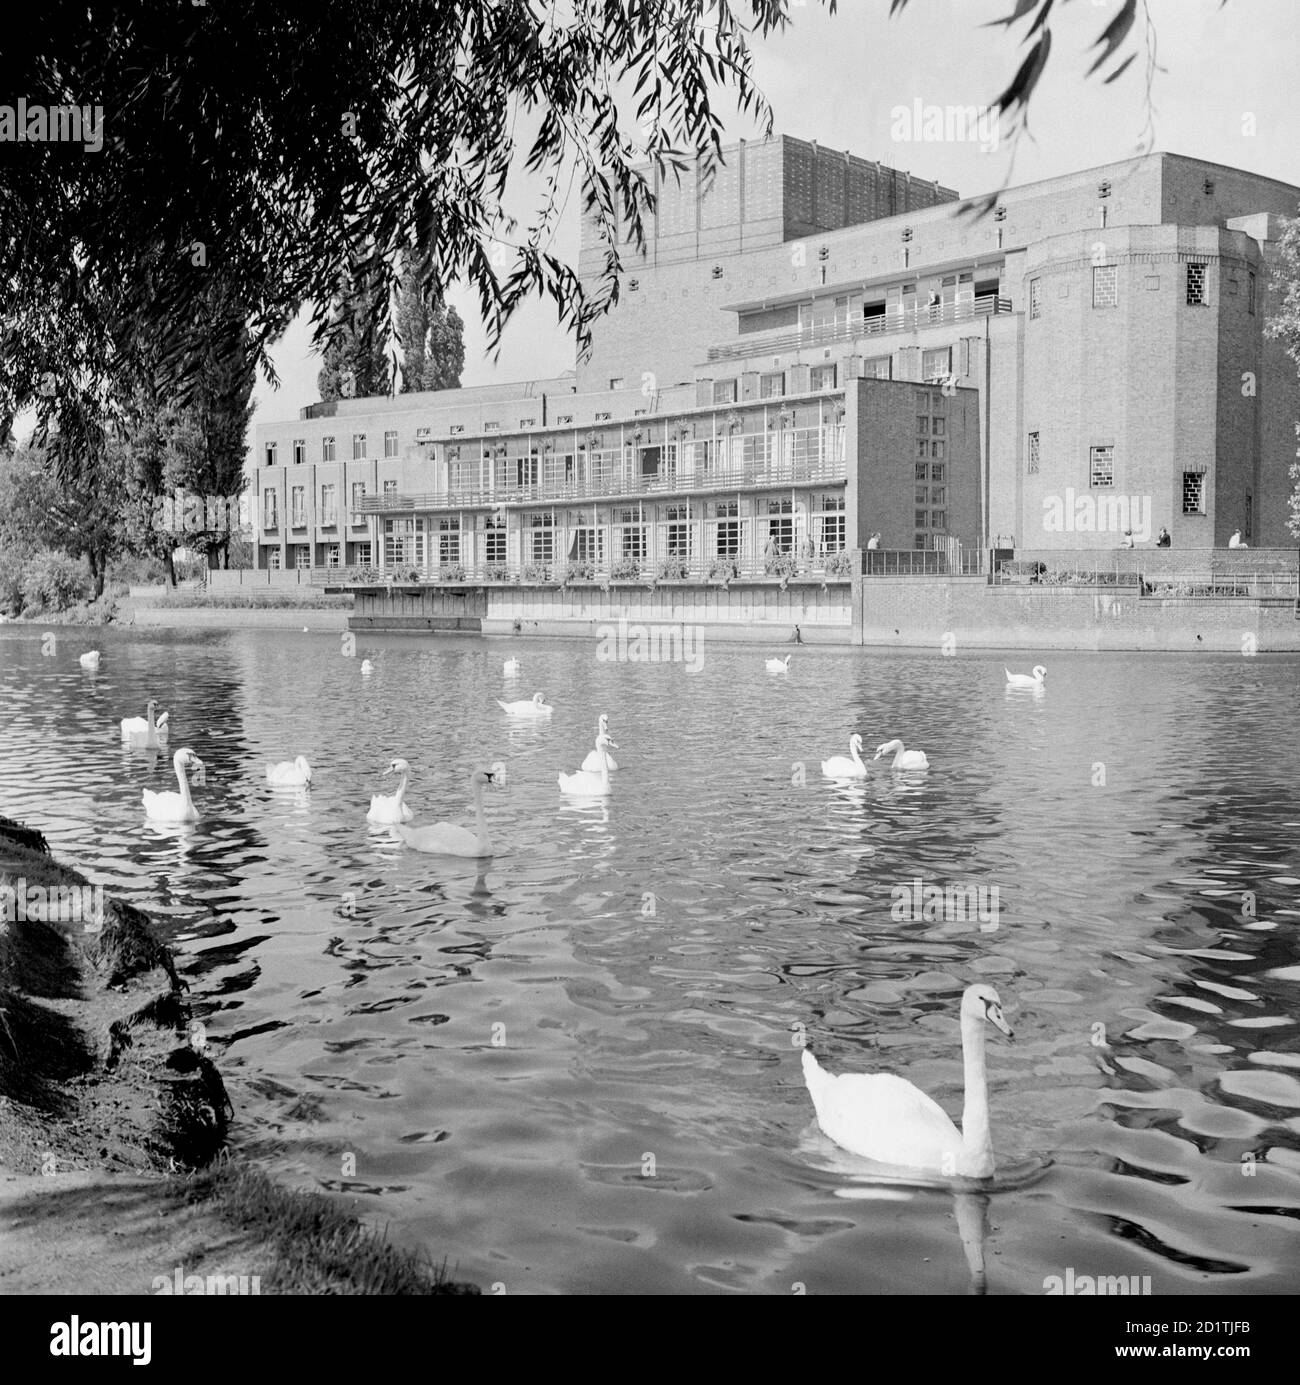 SHAKESPEARE ROYAL THEATRE, Stratford upon Avon, Warwickshire. A view of the Shakespeare Royal Theatre in Stratford-upon-Avon looking across the river, with swans in the foreground. It was designed by Elizabeth Scott and completed in 1932. Photographed by Eric de Mare between 1945 and 1980. Stock Photo